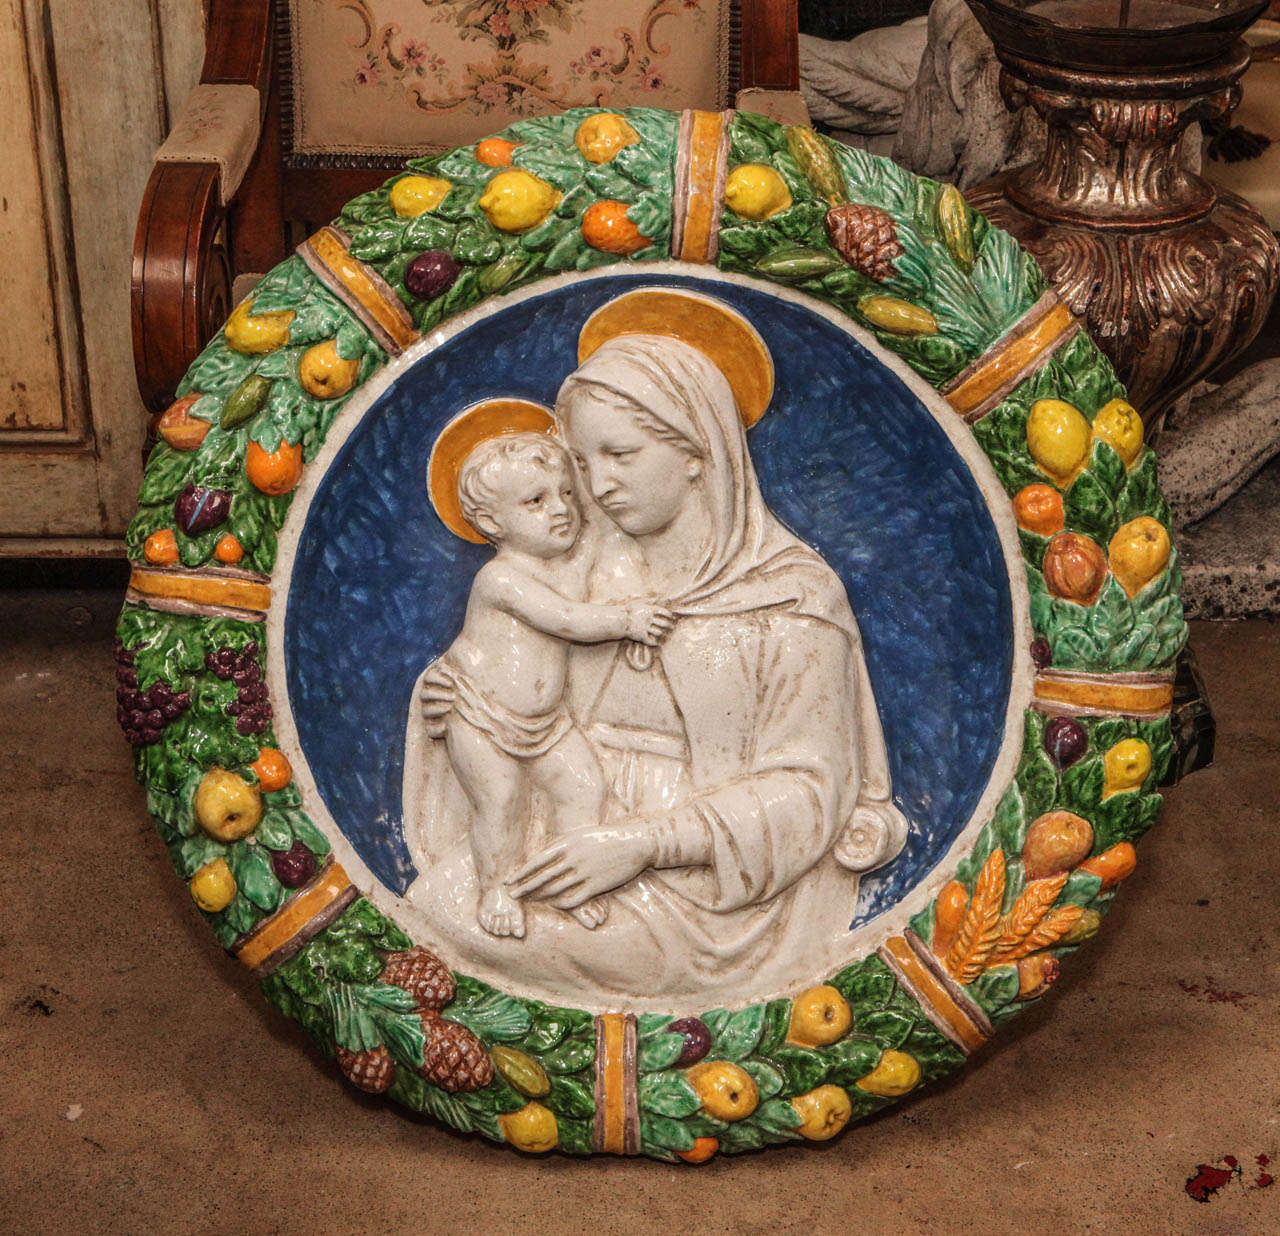 Large, round, hand-painted, terracotta medallion of the Madonna and child, surrounded by a border of leaves and with fruit and flowers.